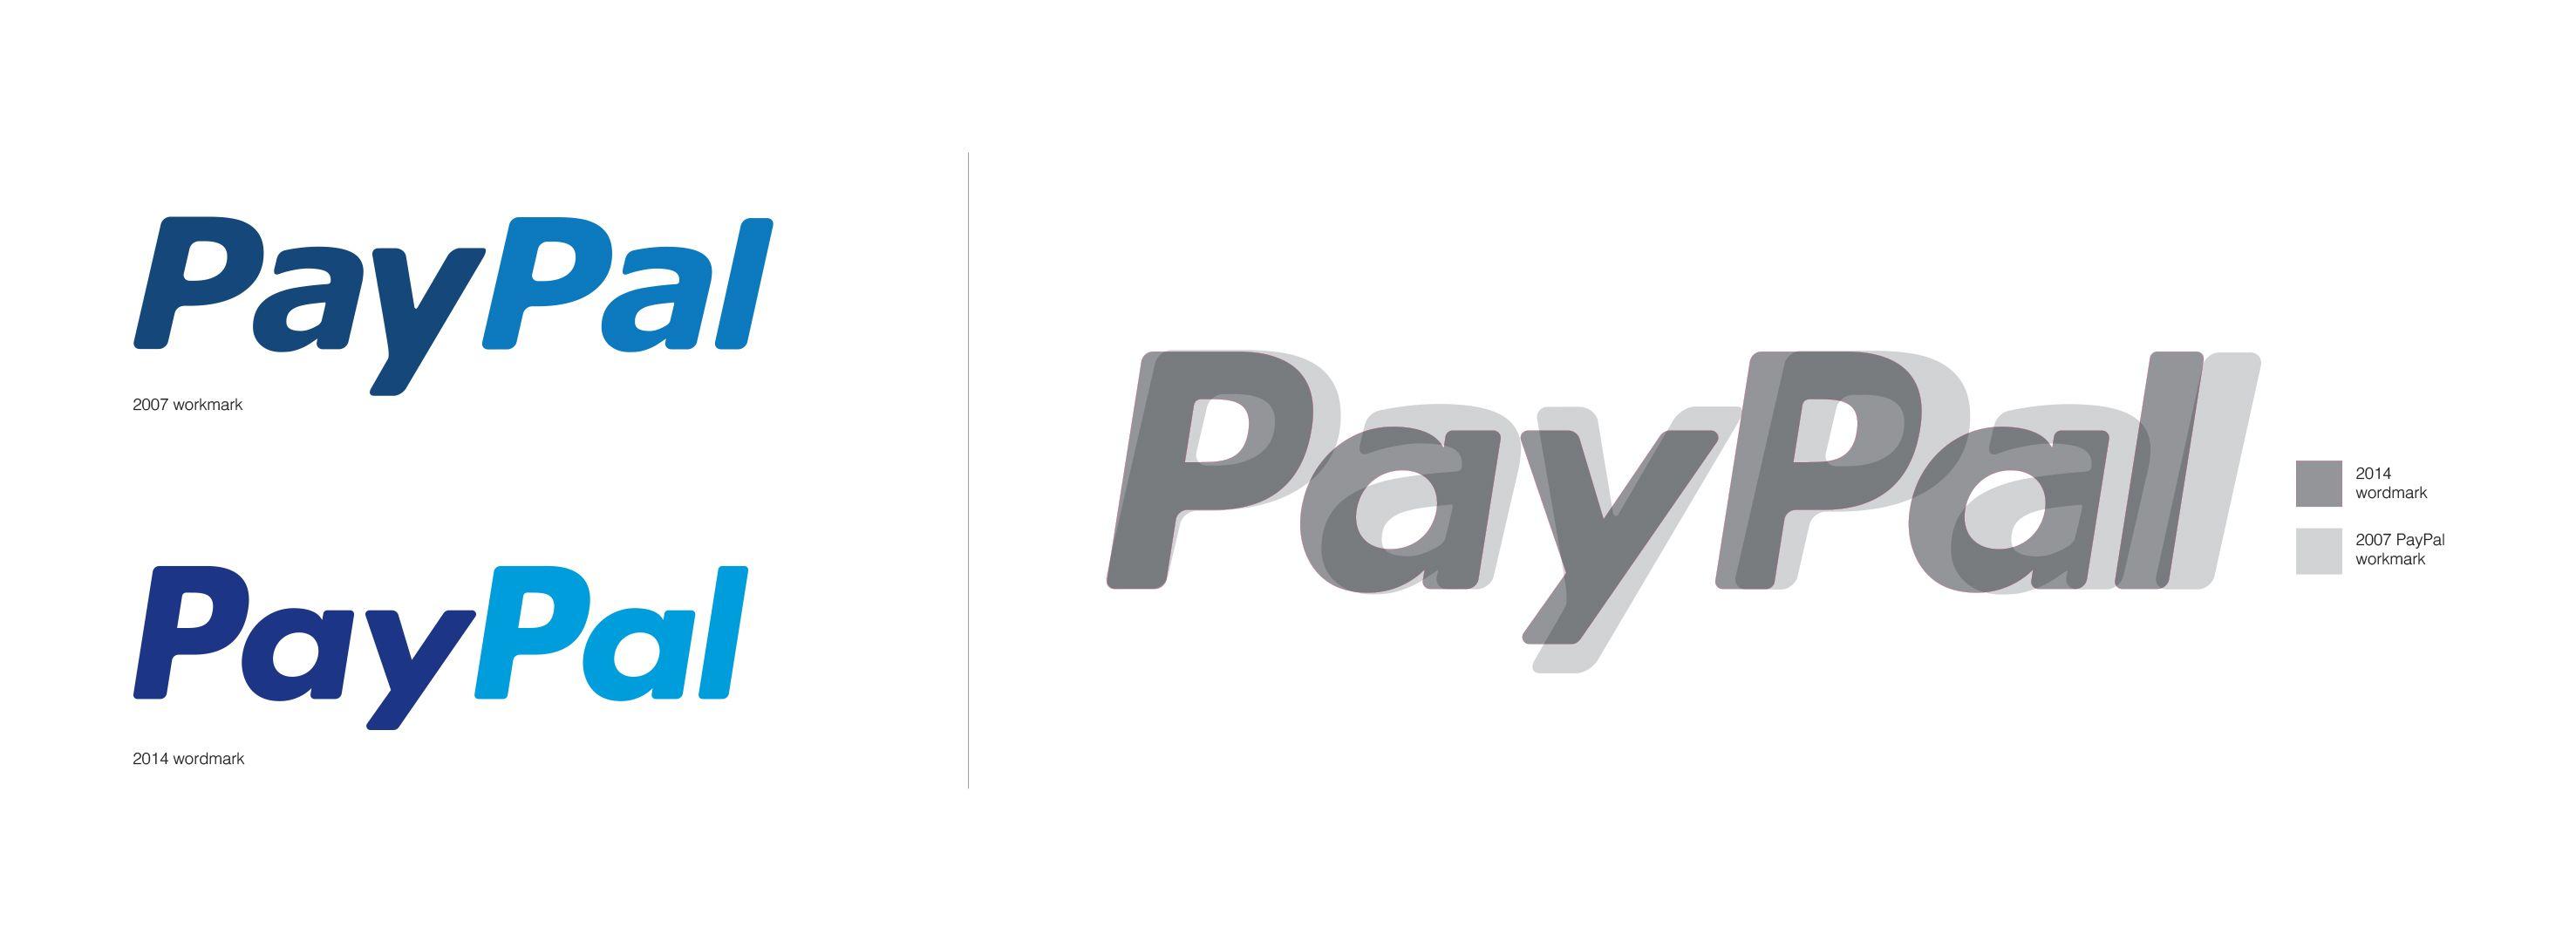 First PayPal Logo - PayPal launches major brand refresh | Marketing Interactive